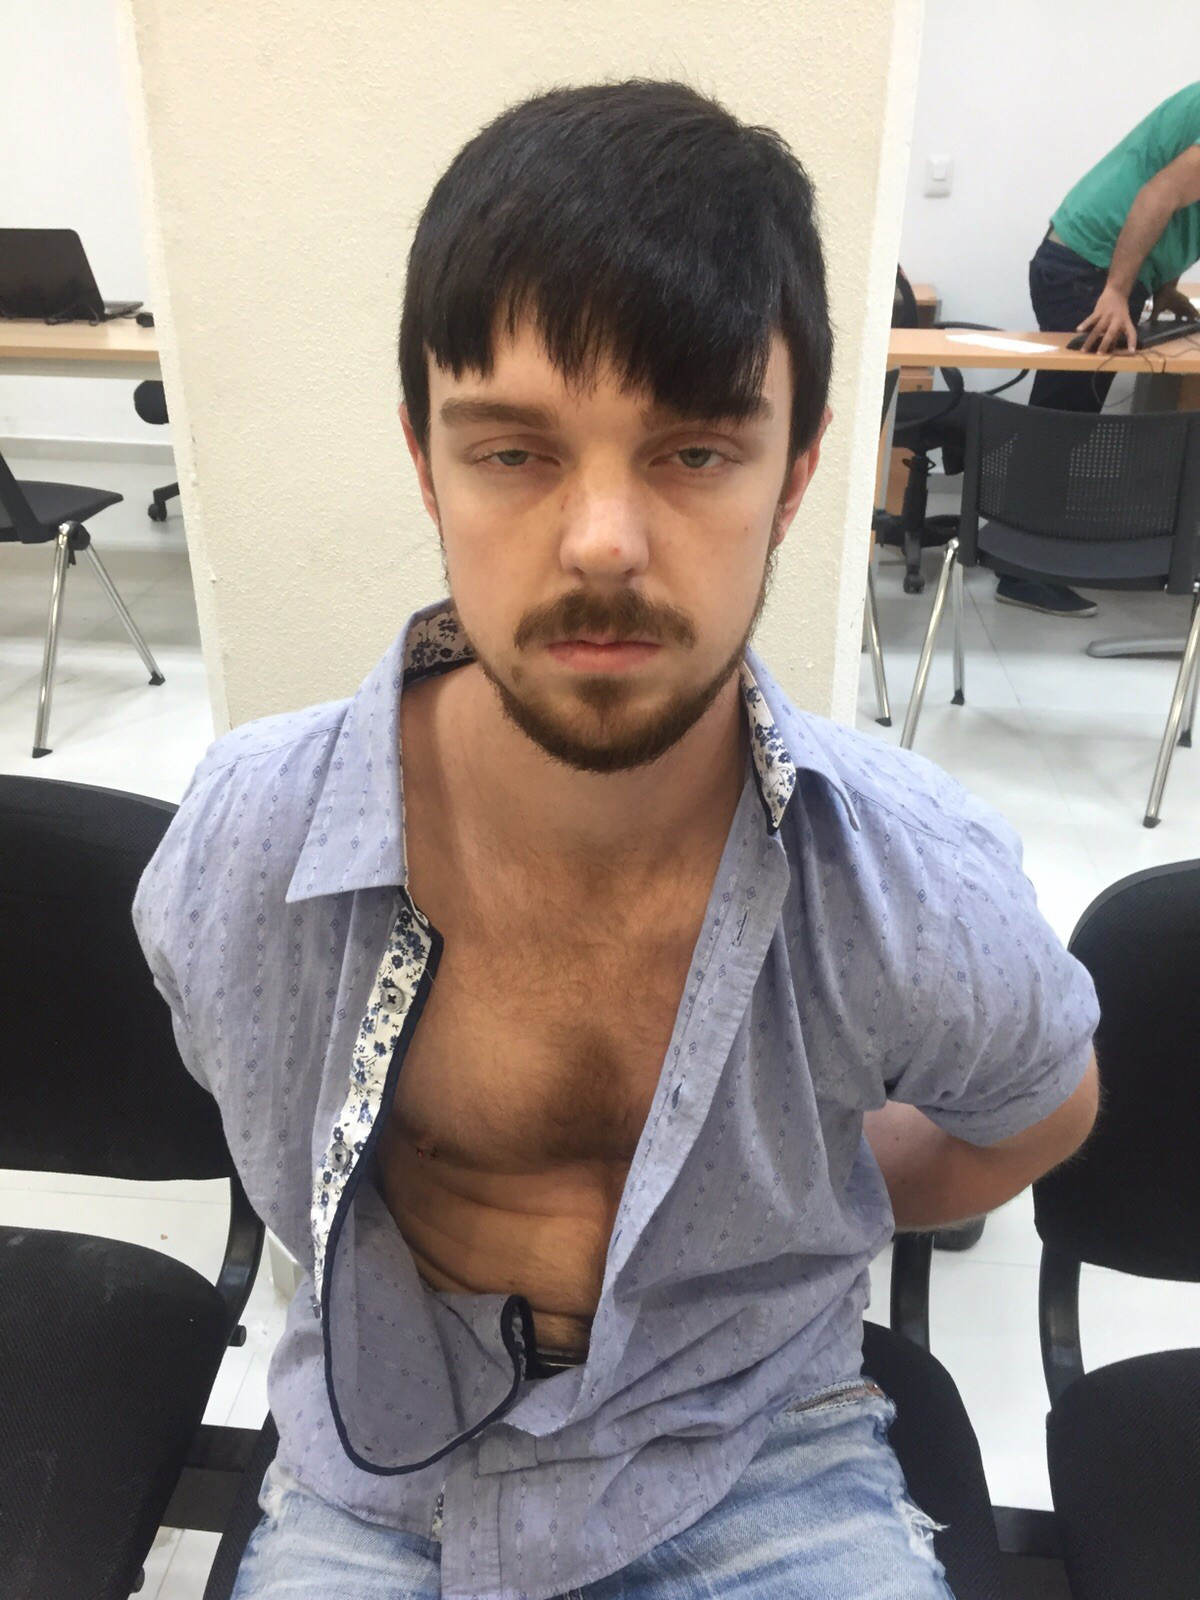 Authorities identify Ethan Couch after he was taken into custody in Puerto Vallarta, Mexico. Dec. 28, 2015. (Mexico's Jalisco state prosecutor's office/AP)